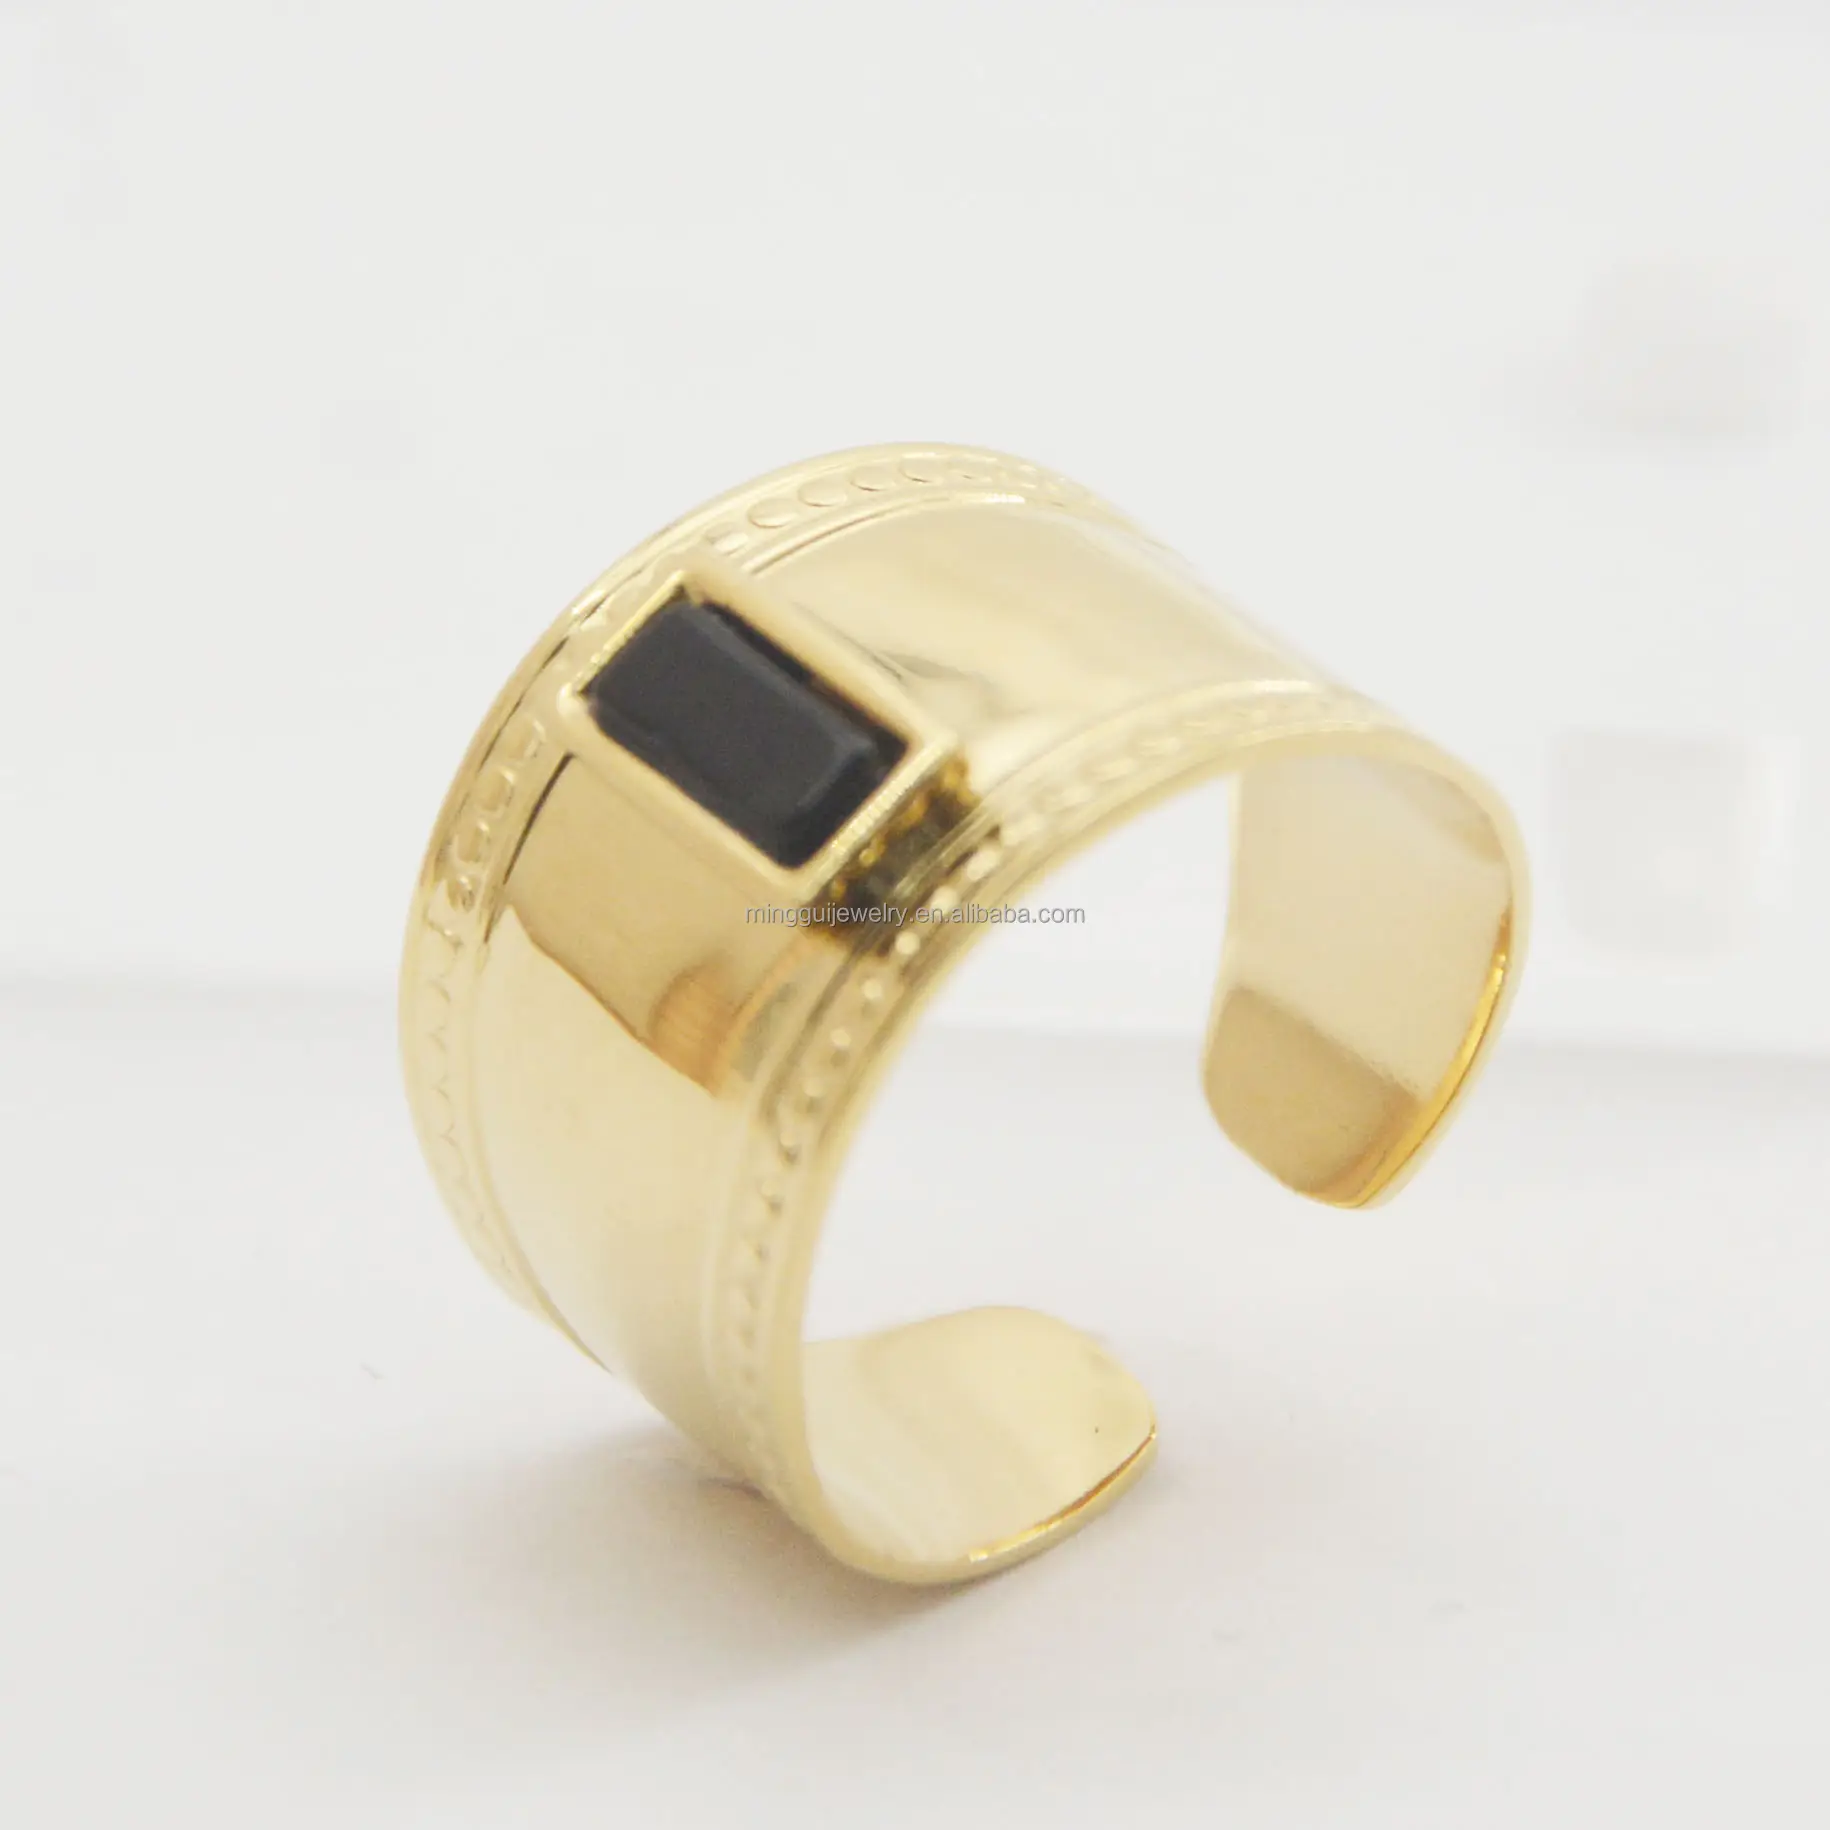 Latest Smooth surface embossing single stone ring designs  new gold ring gift for men woman